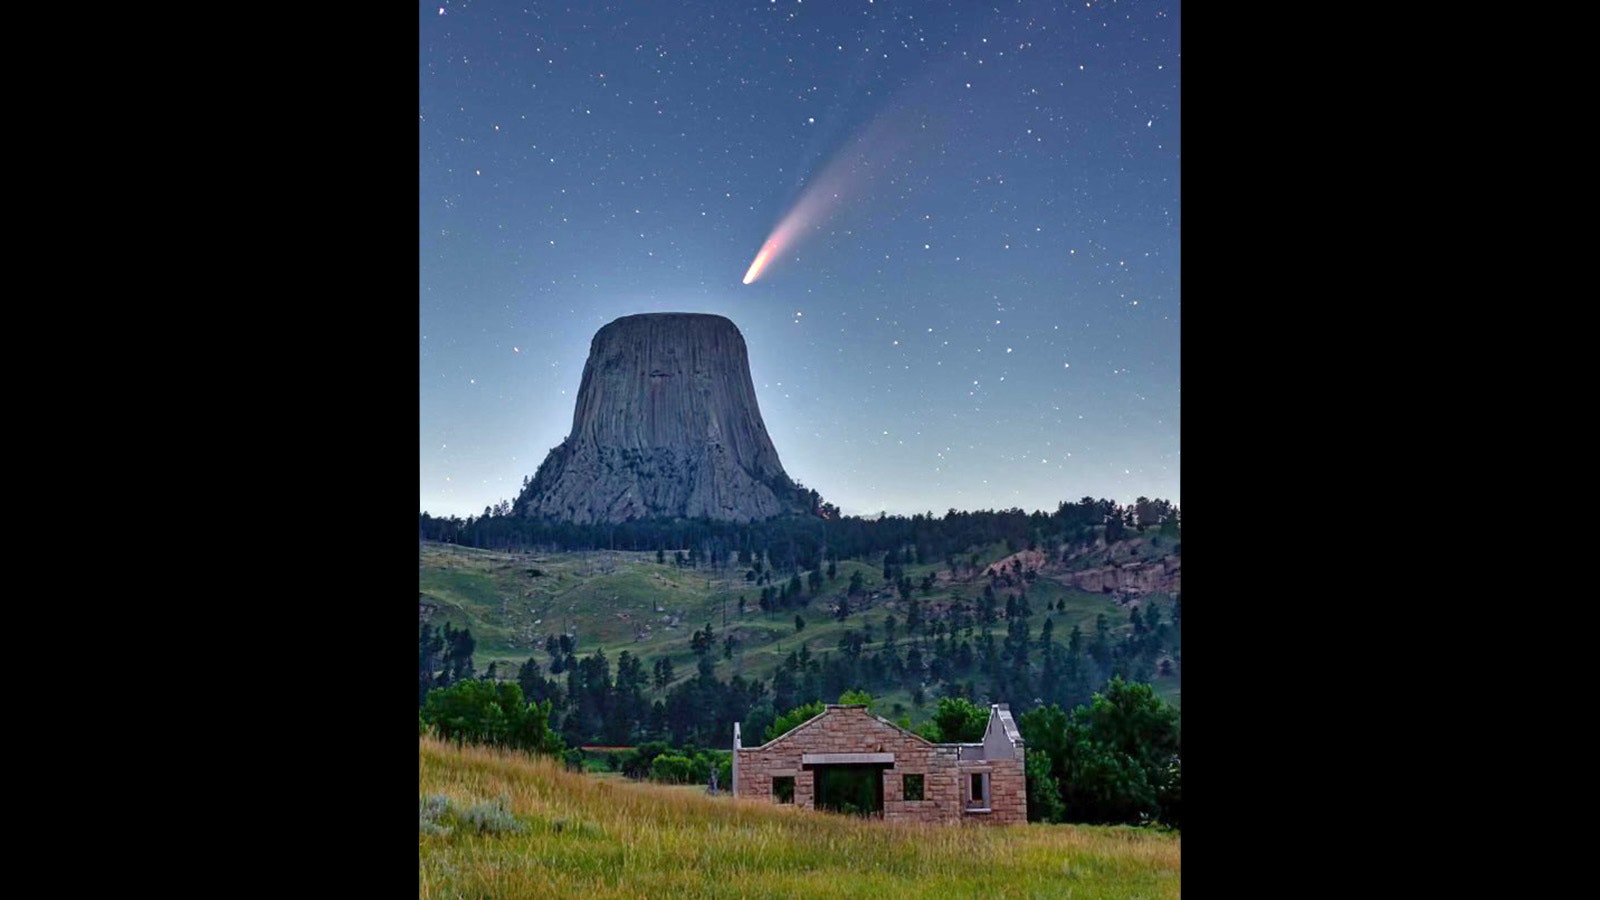 A shooting star over Devils Tower with the historic Toomeys Mill building in the foreground.